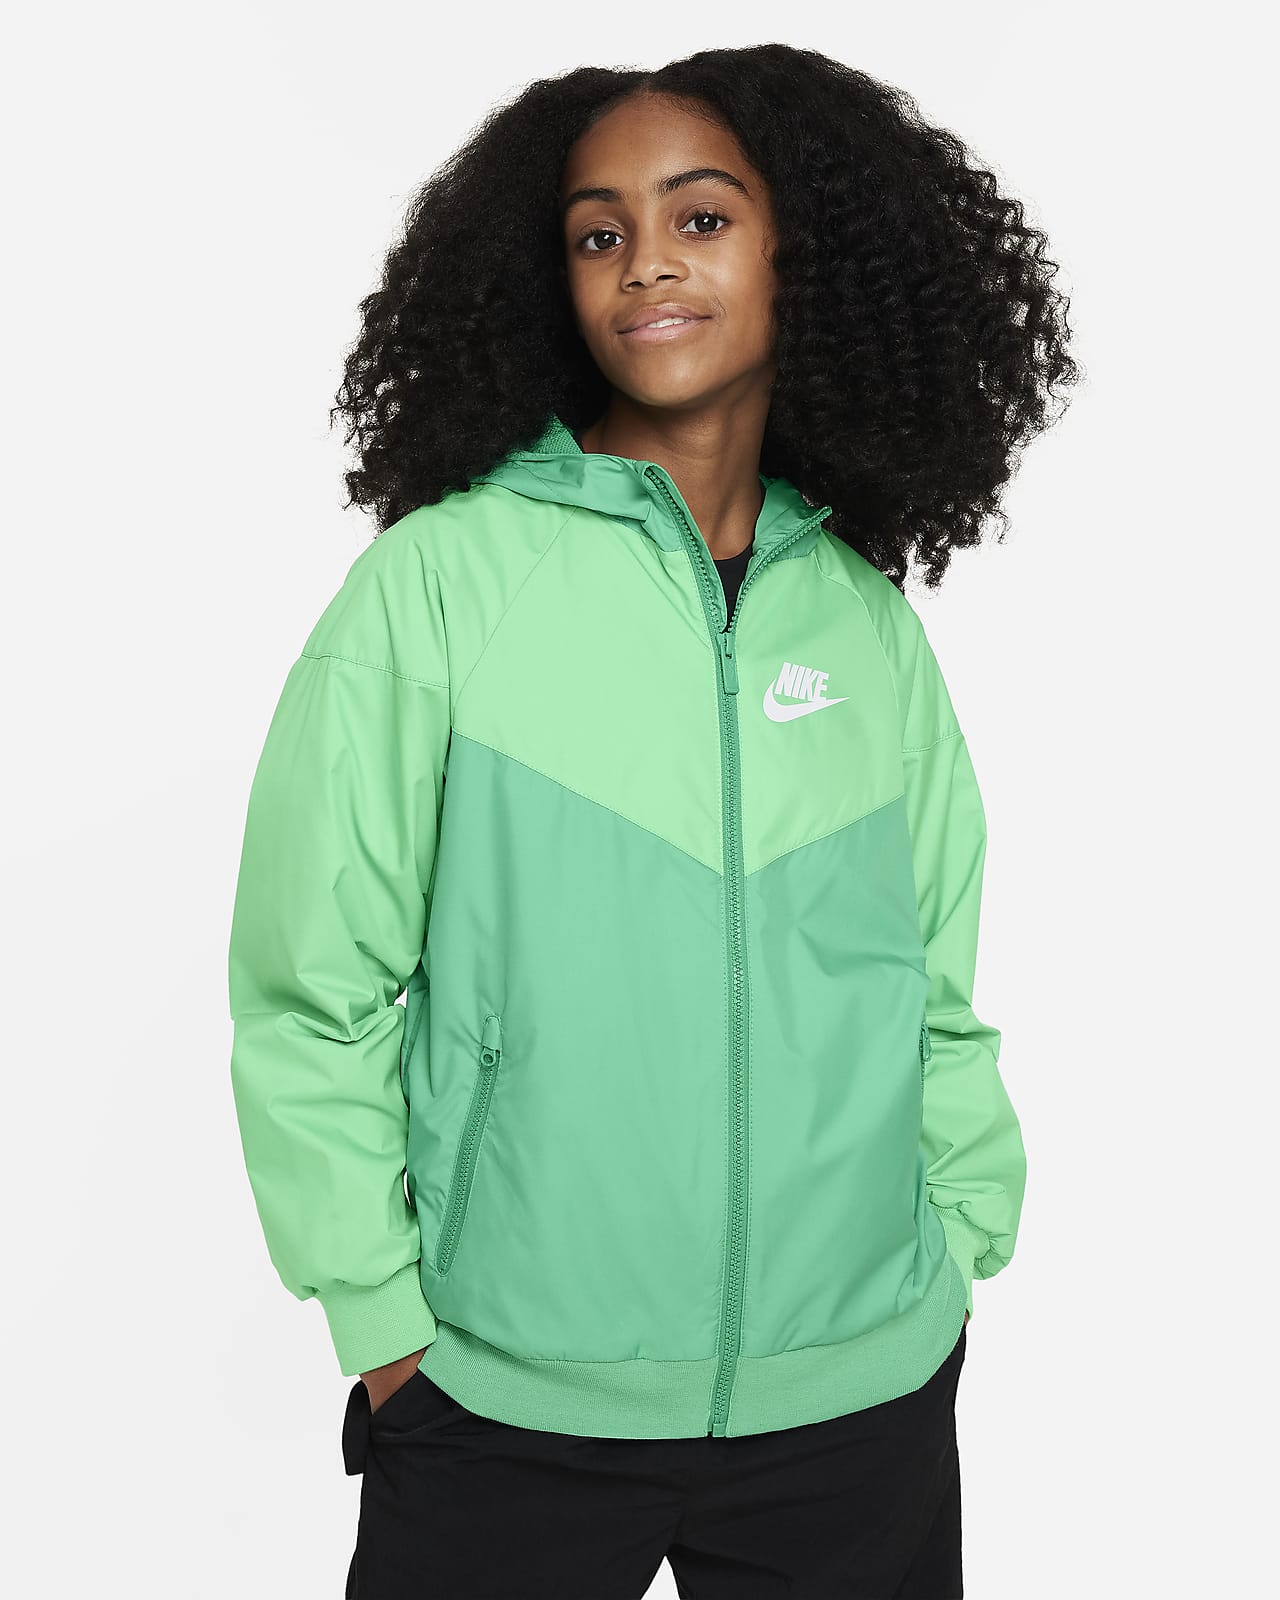 https://static.nike.com/a/images/t_PDP_1280_v1/f_auto,q_auto:eco/1665dc9c-f712-4454-887e-035df074fb7a/sportswear-windrunner-big-kids-boys-loose-hip-length-hooded-jacket-9DrCD8.png